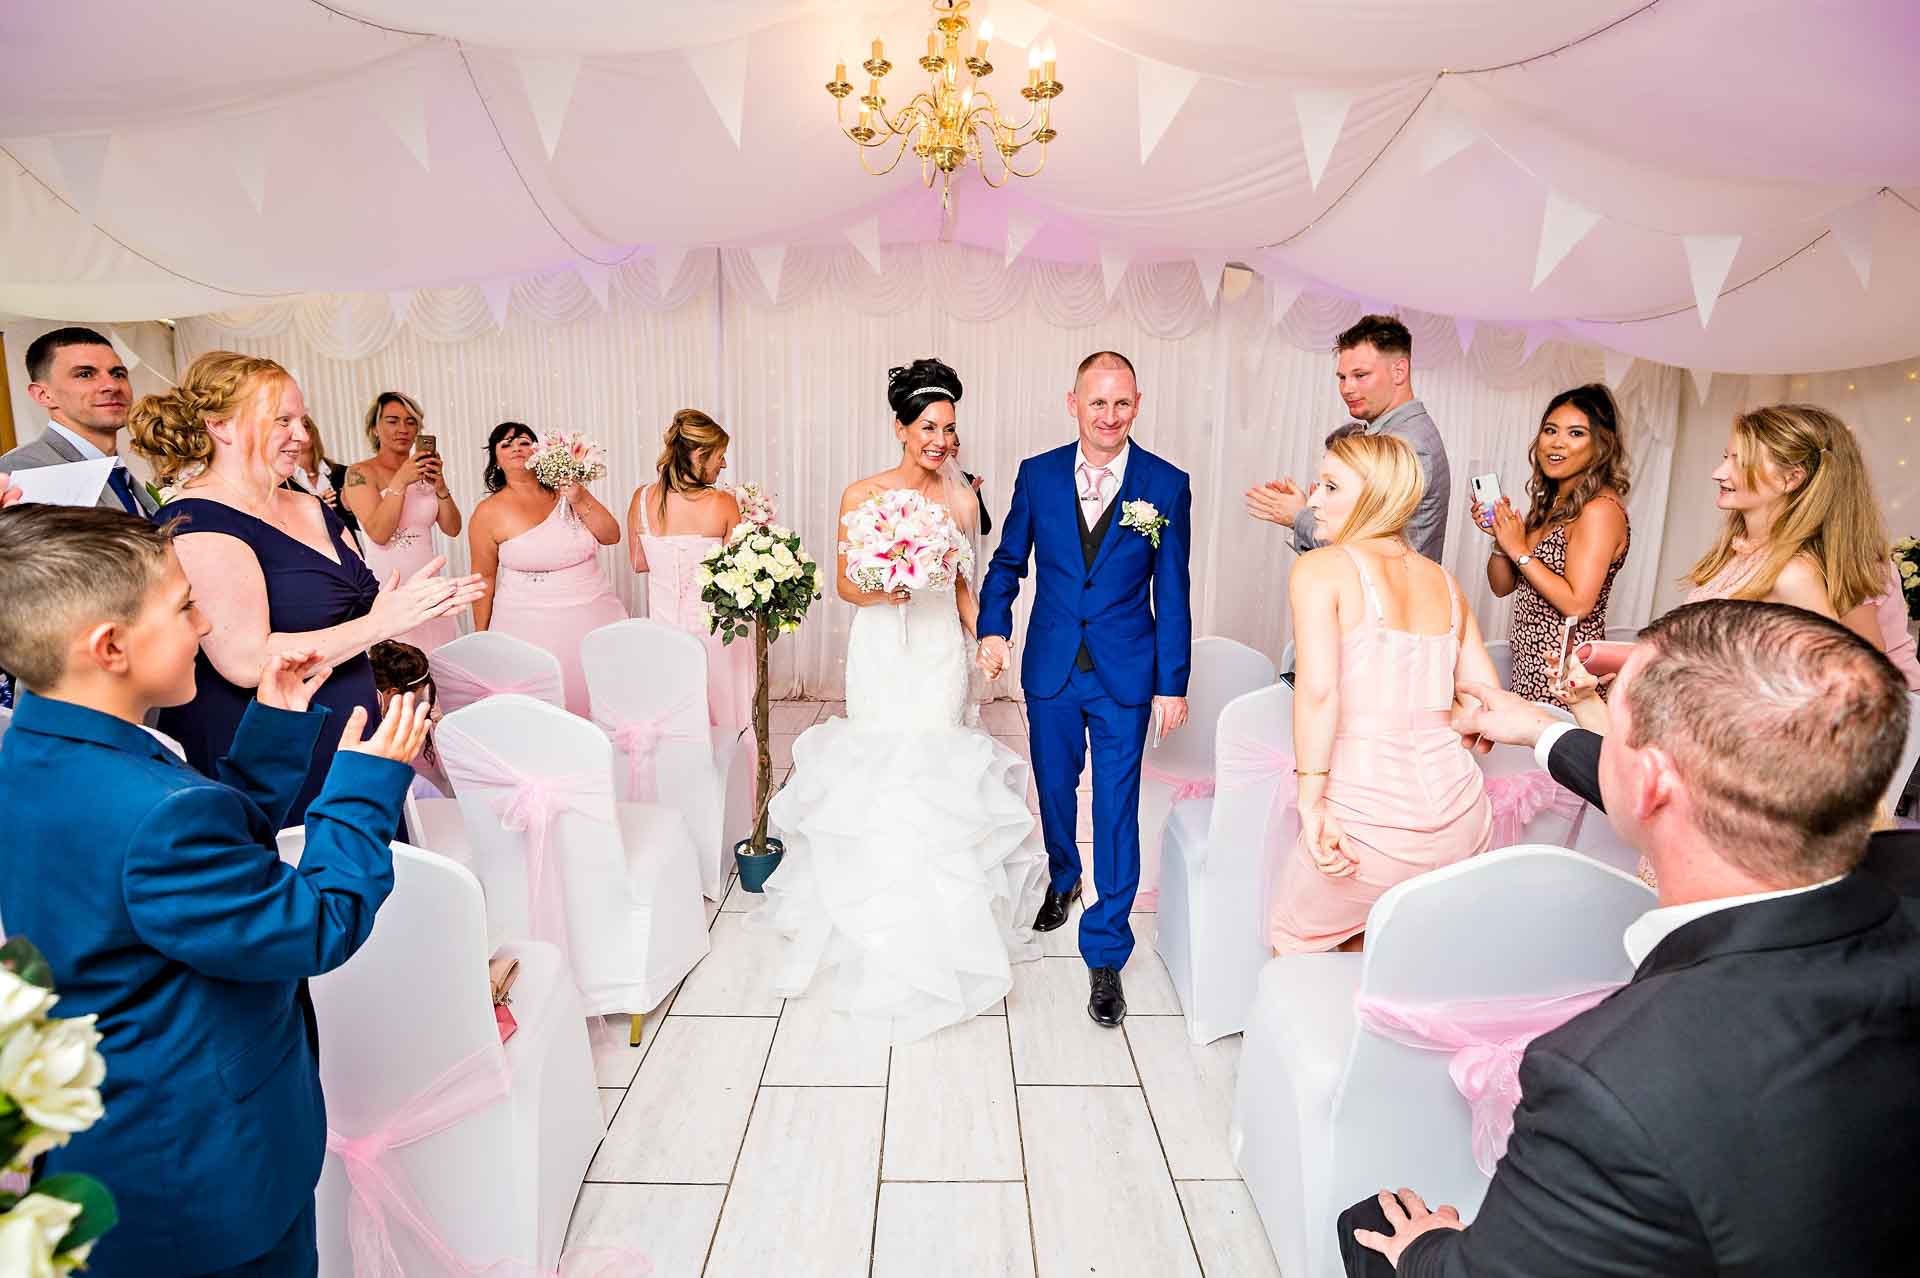 The bride and groom walk back up the aisle in the Marquee at Ridgeway Golf Club